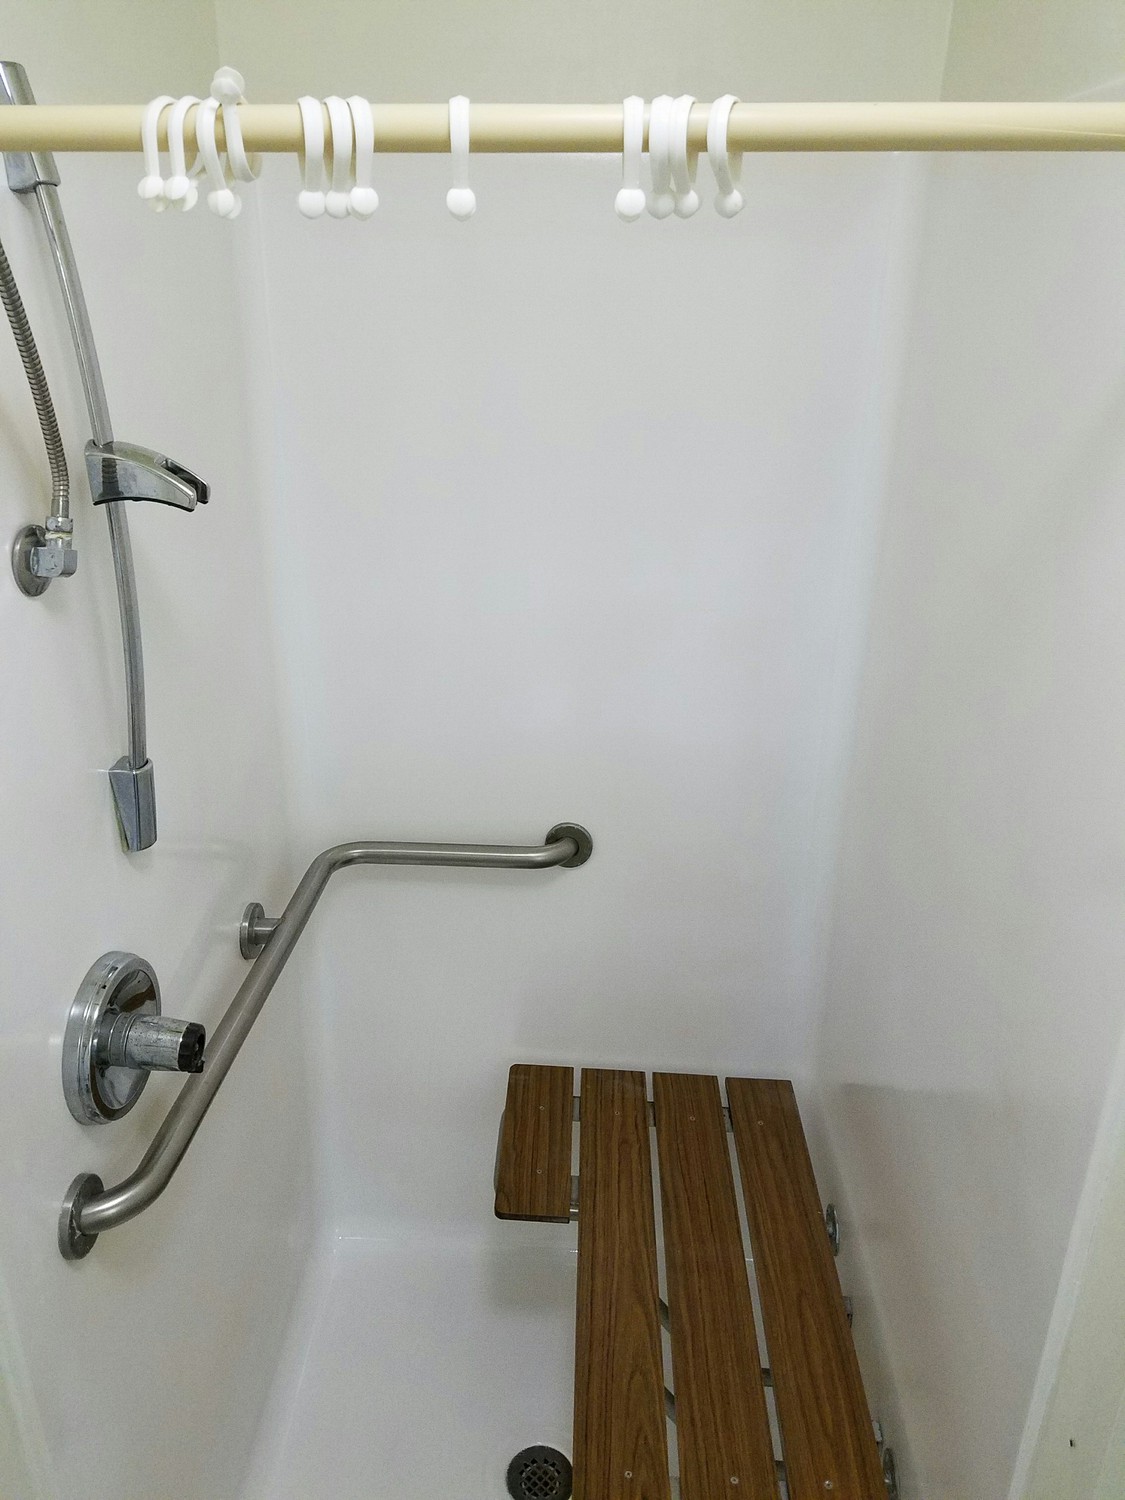 Fiberglass handicapped shower with fiberglass rebuilt shower pan that was repaired, coated, and refinished